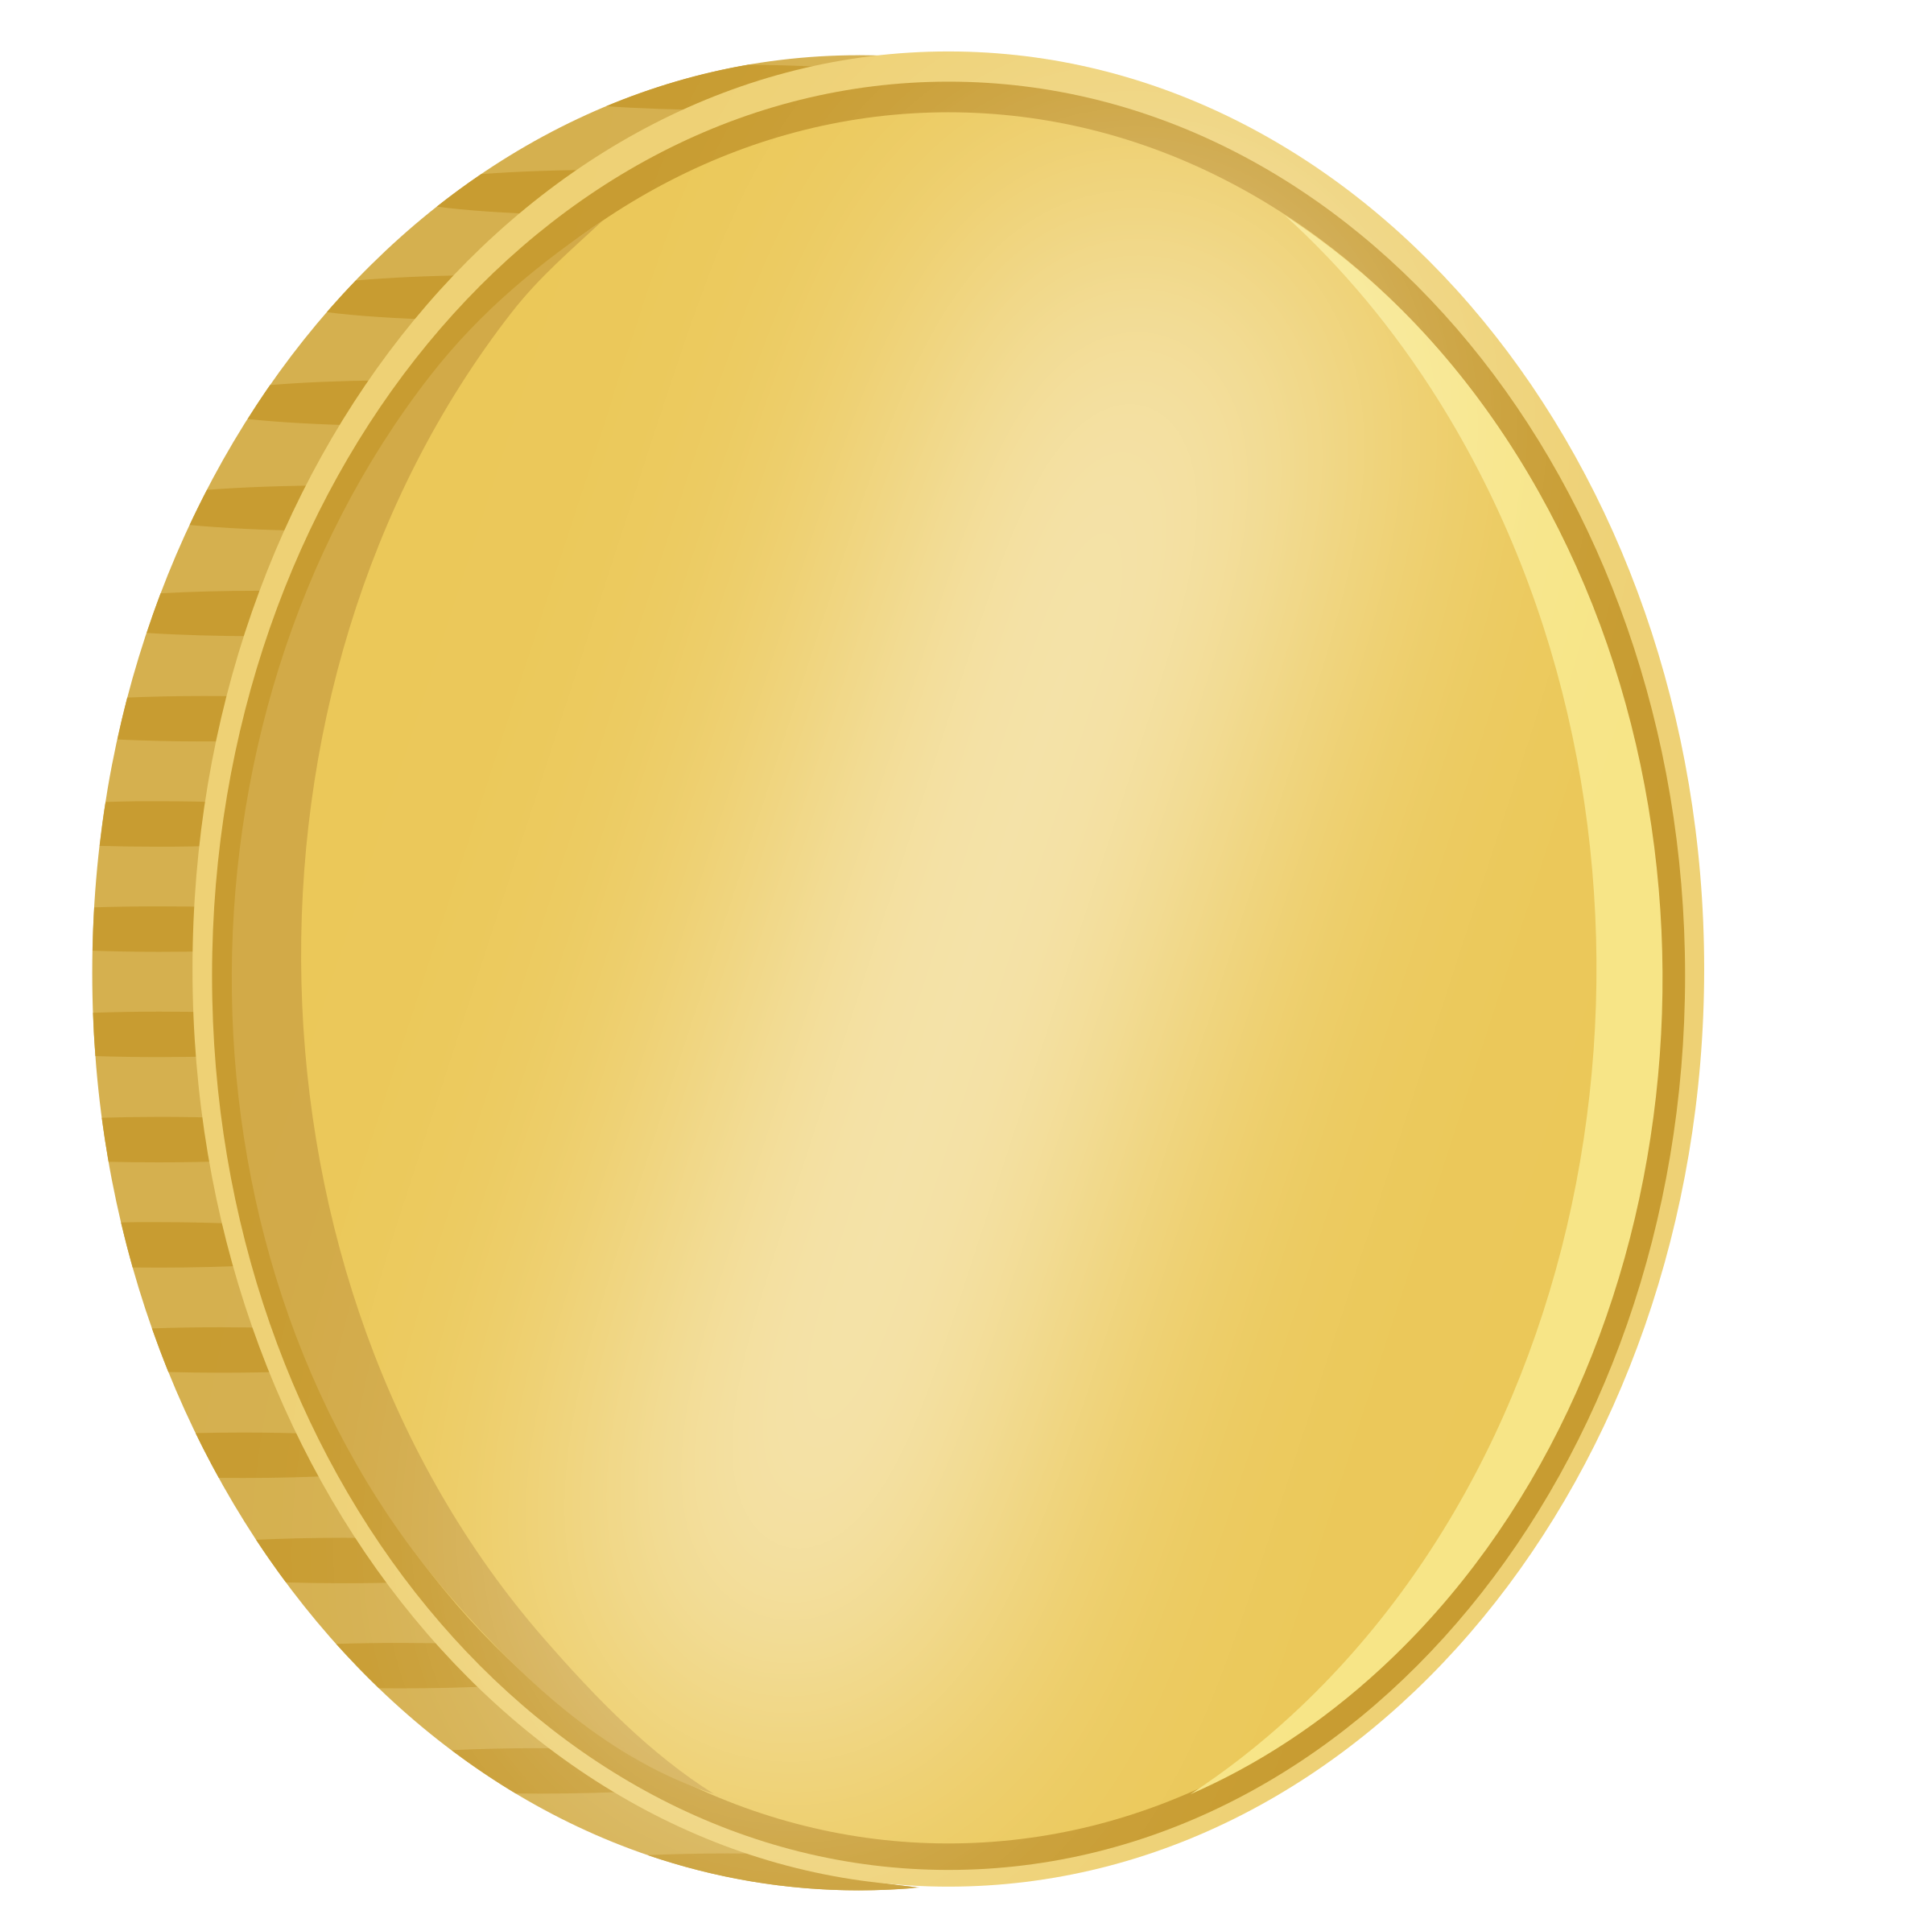 Gold Chain and Coin Border - 